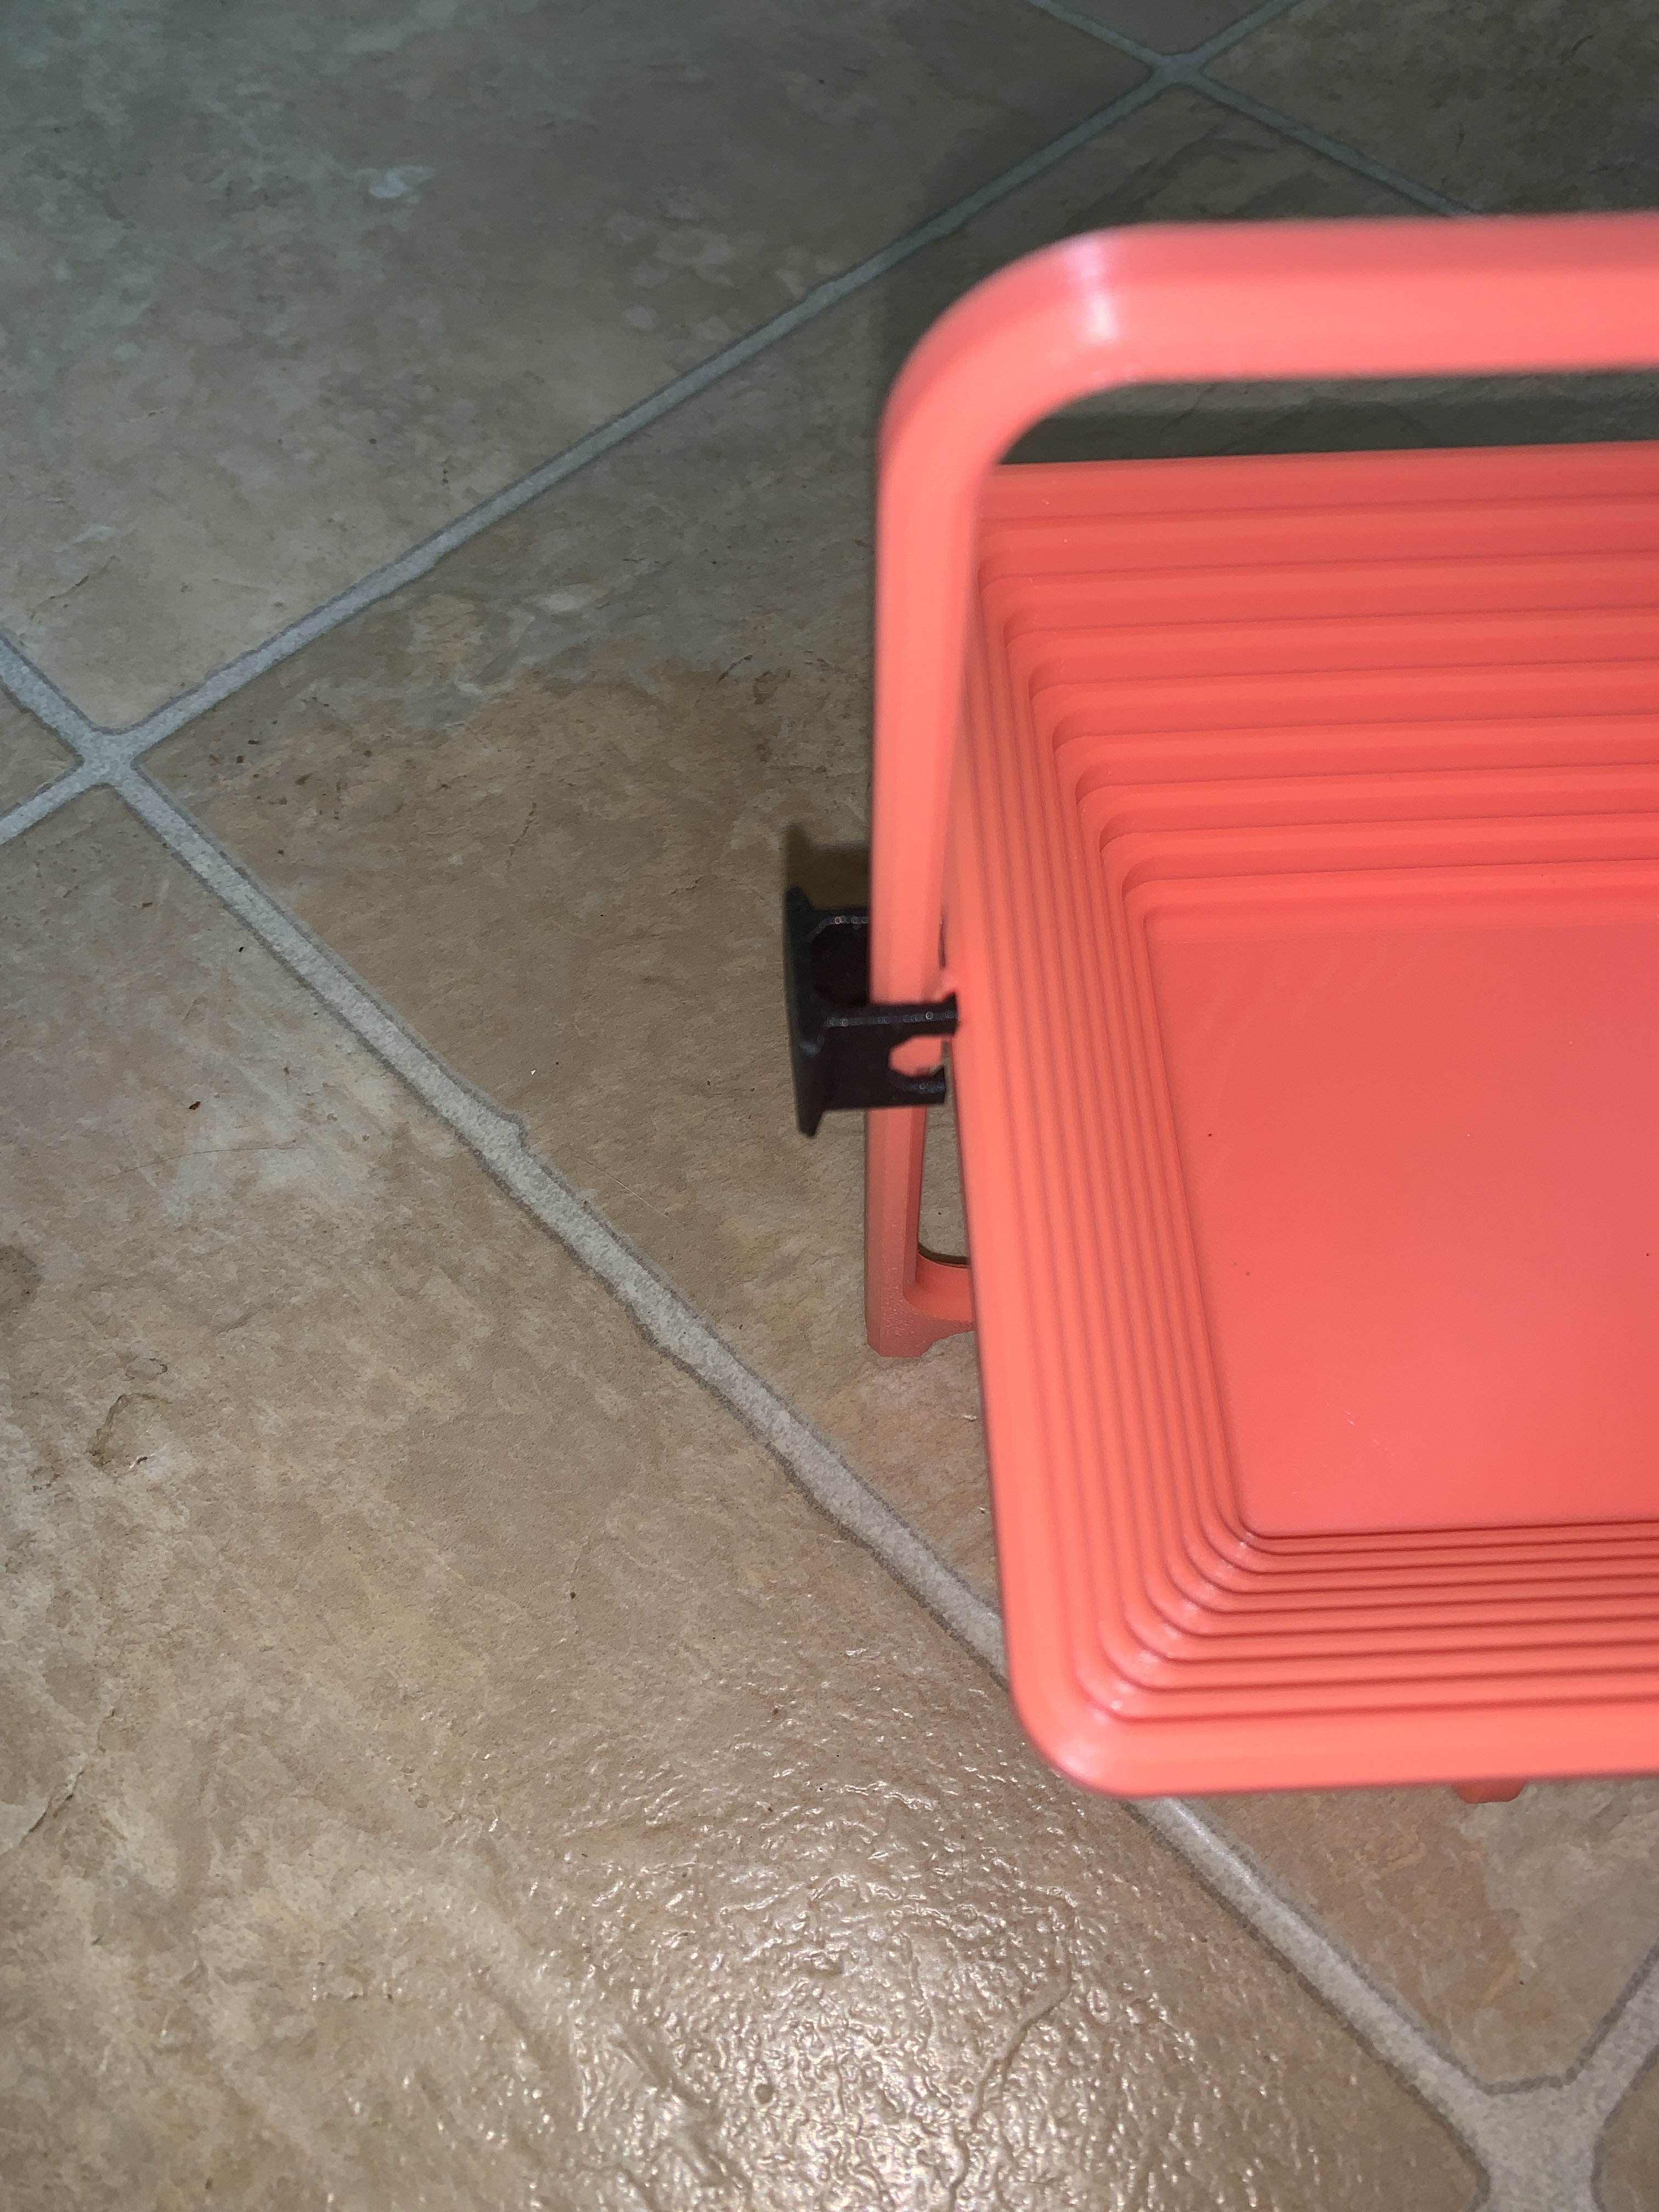 Locking clip for collapsible basket